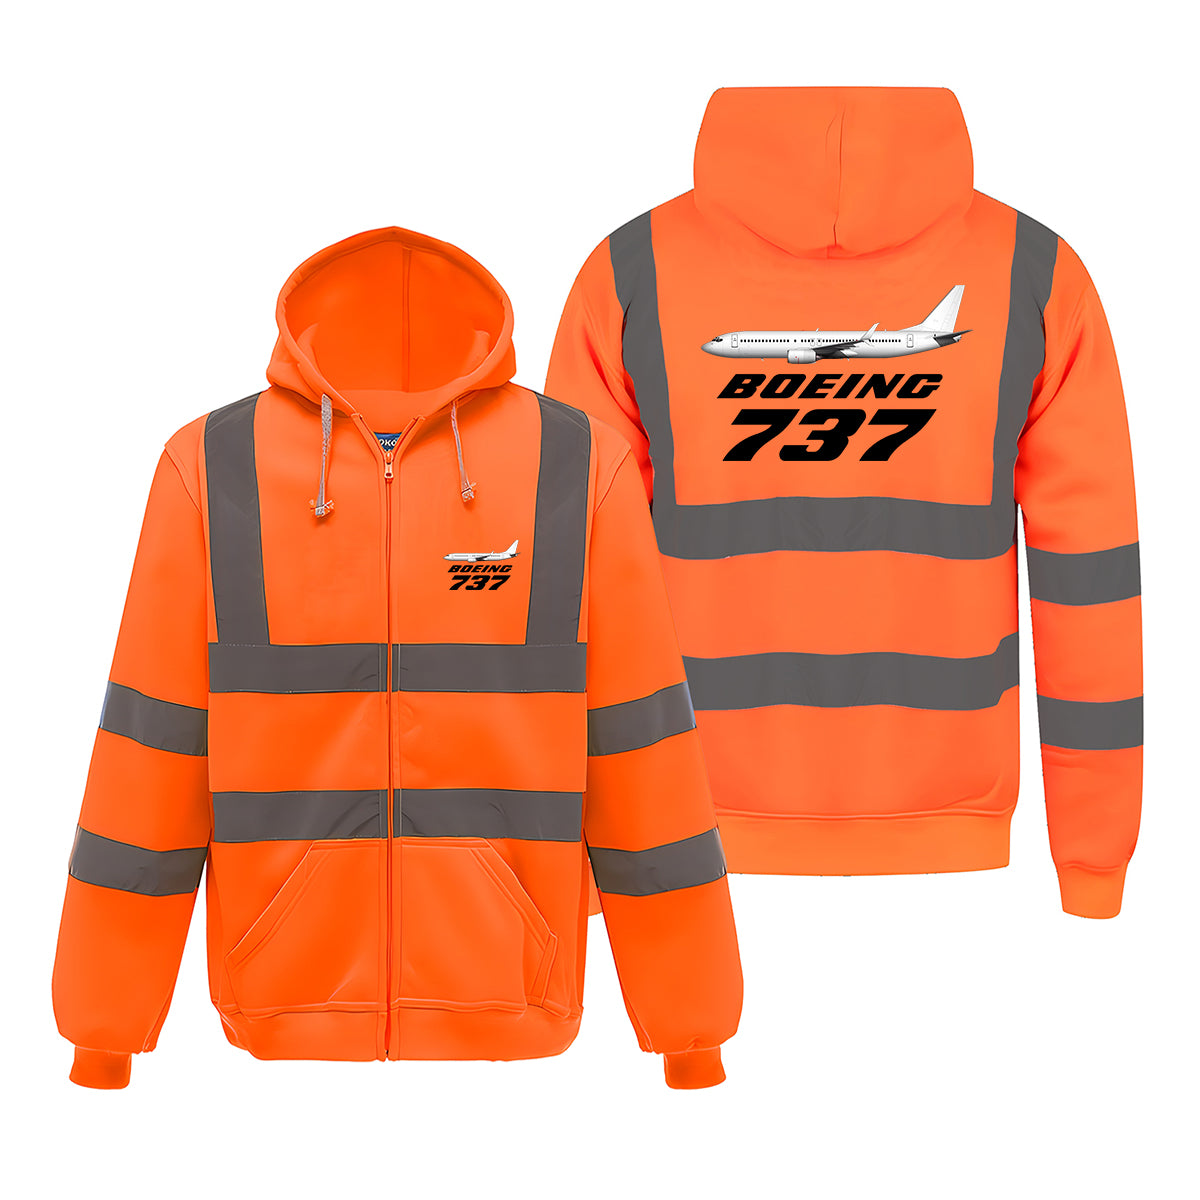 The Boeing 737 Designed Reflective Zipped Hoodies